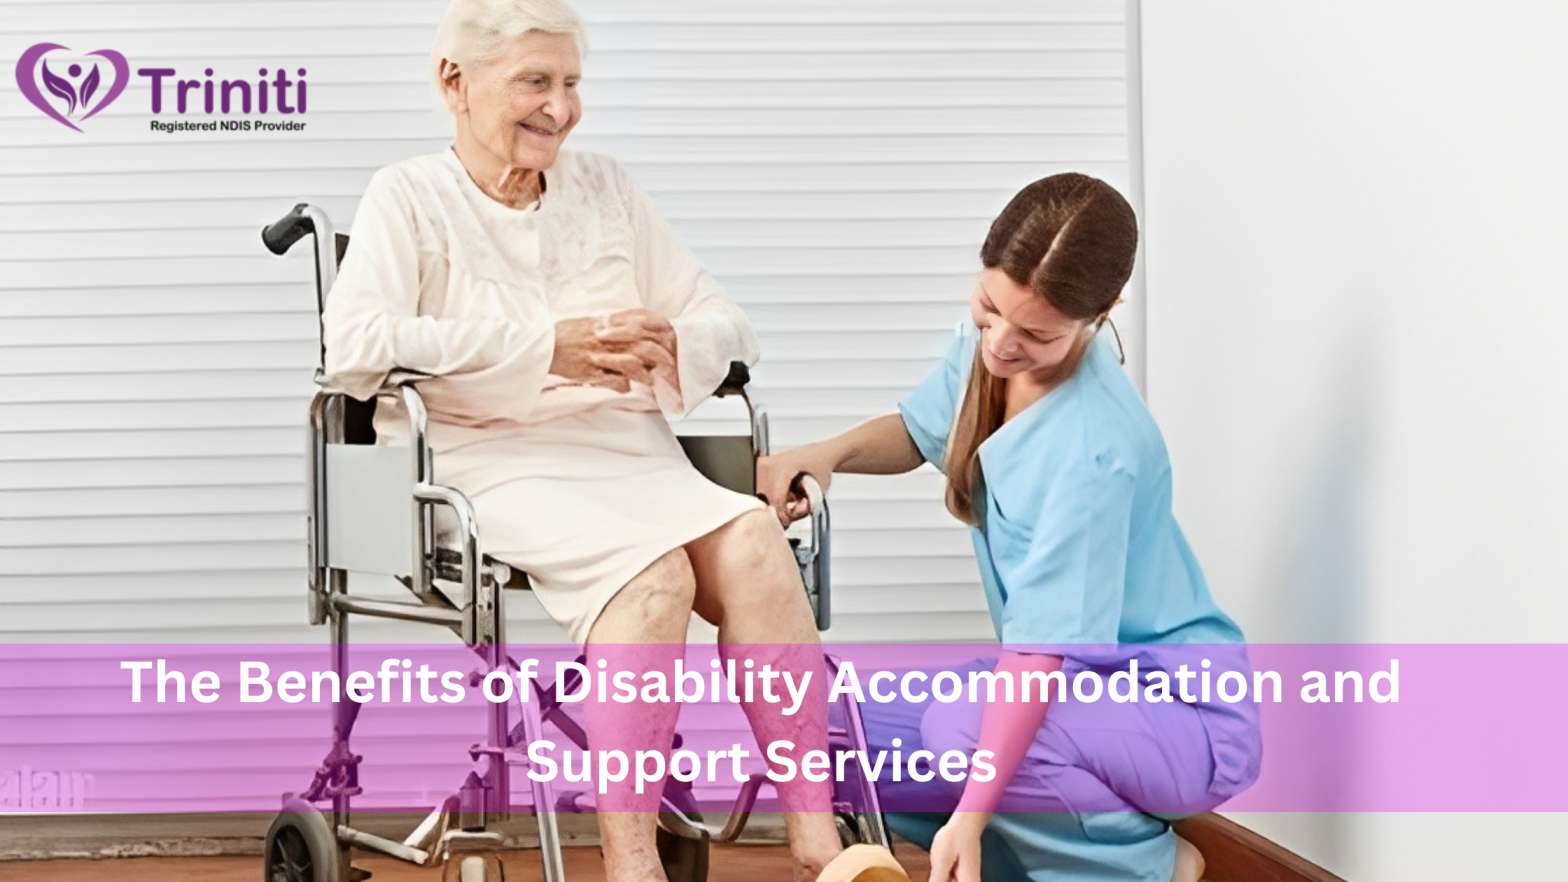 The Benefits of Disability Accommodation and Support Services